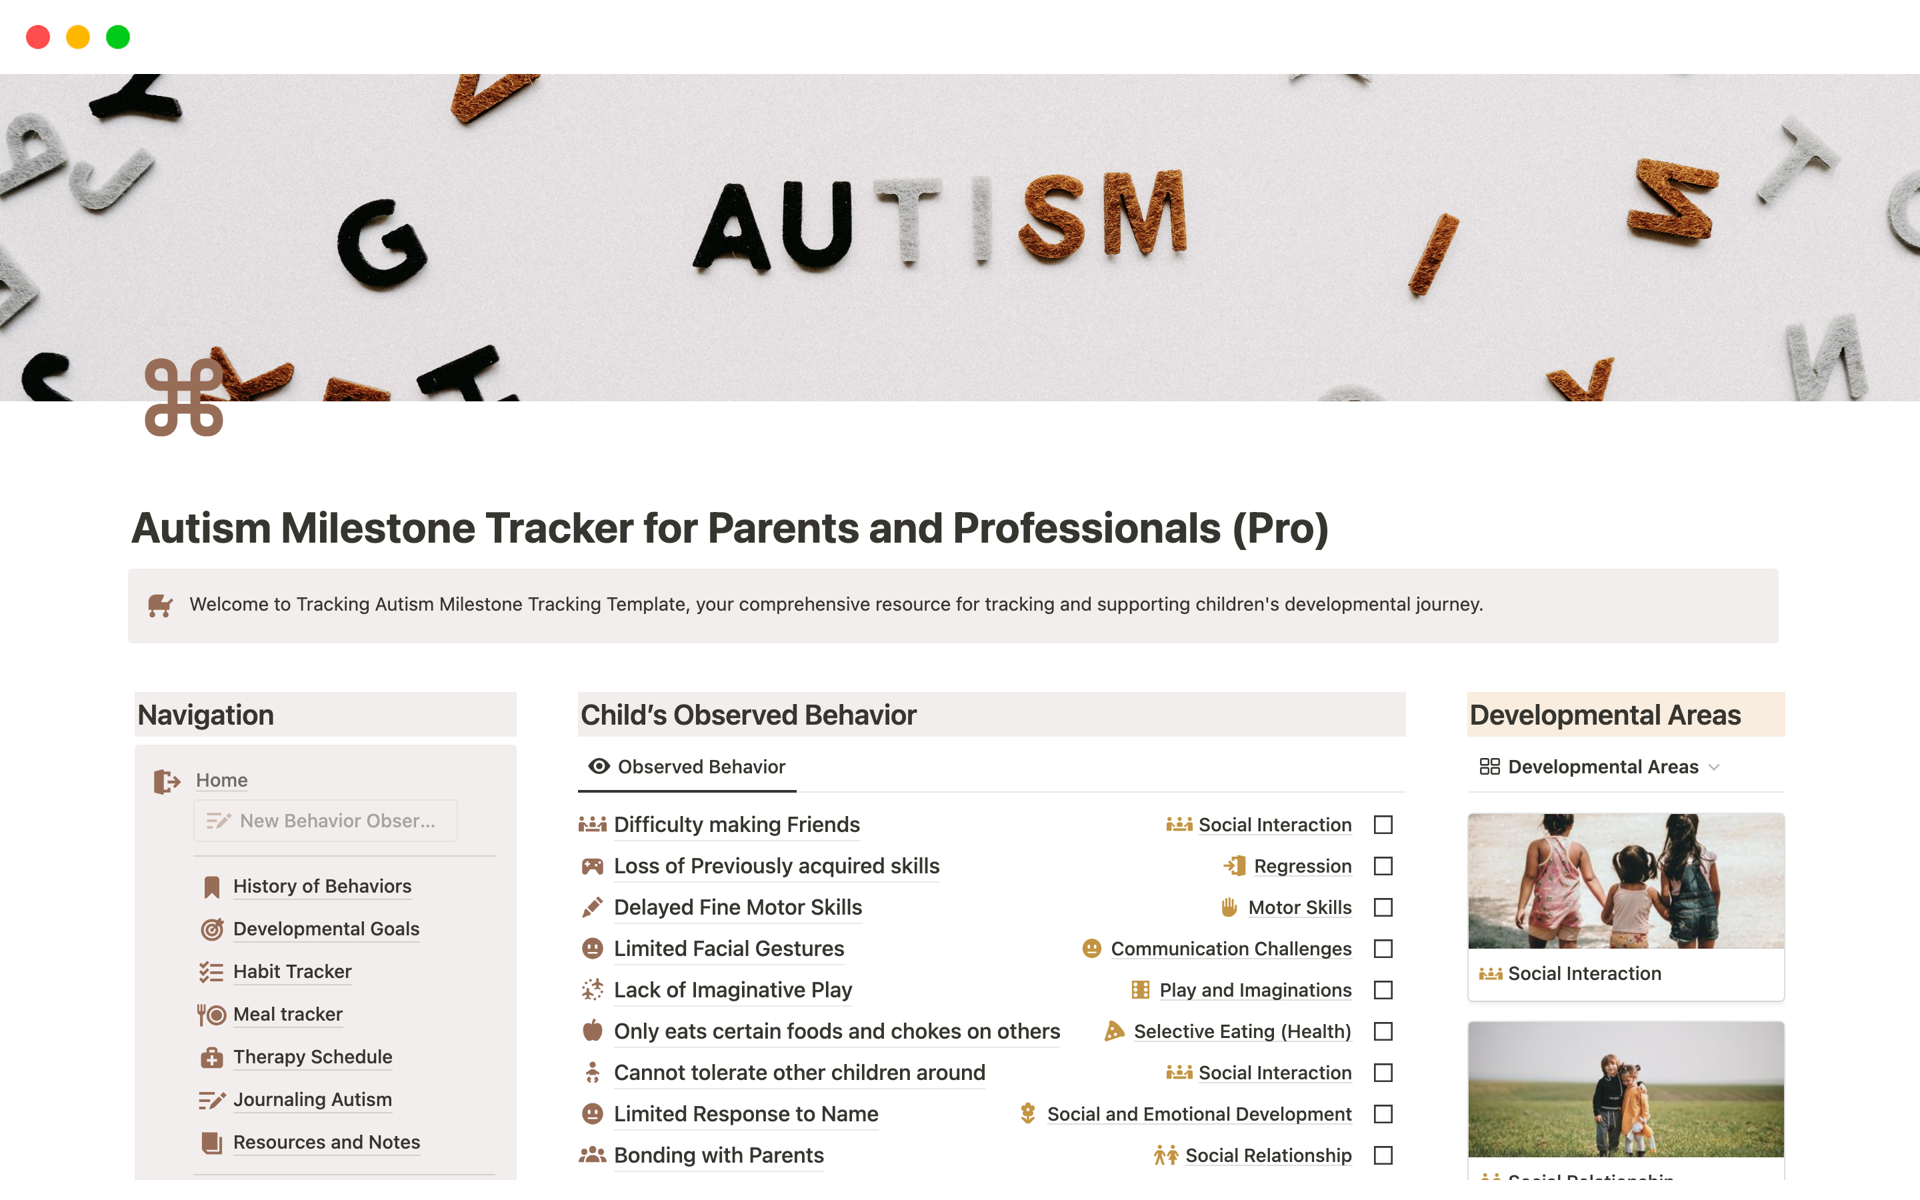 An Autism Milestone Tracking Template for Parents and Professionals to track, maintain and document the developmental journey of an autistic child. 